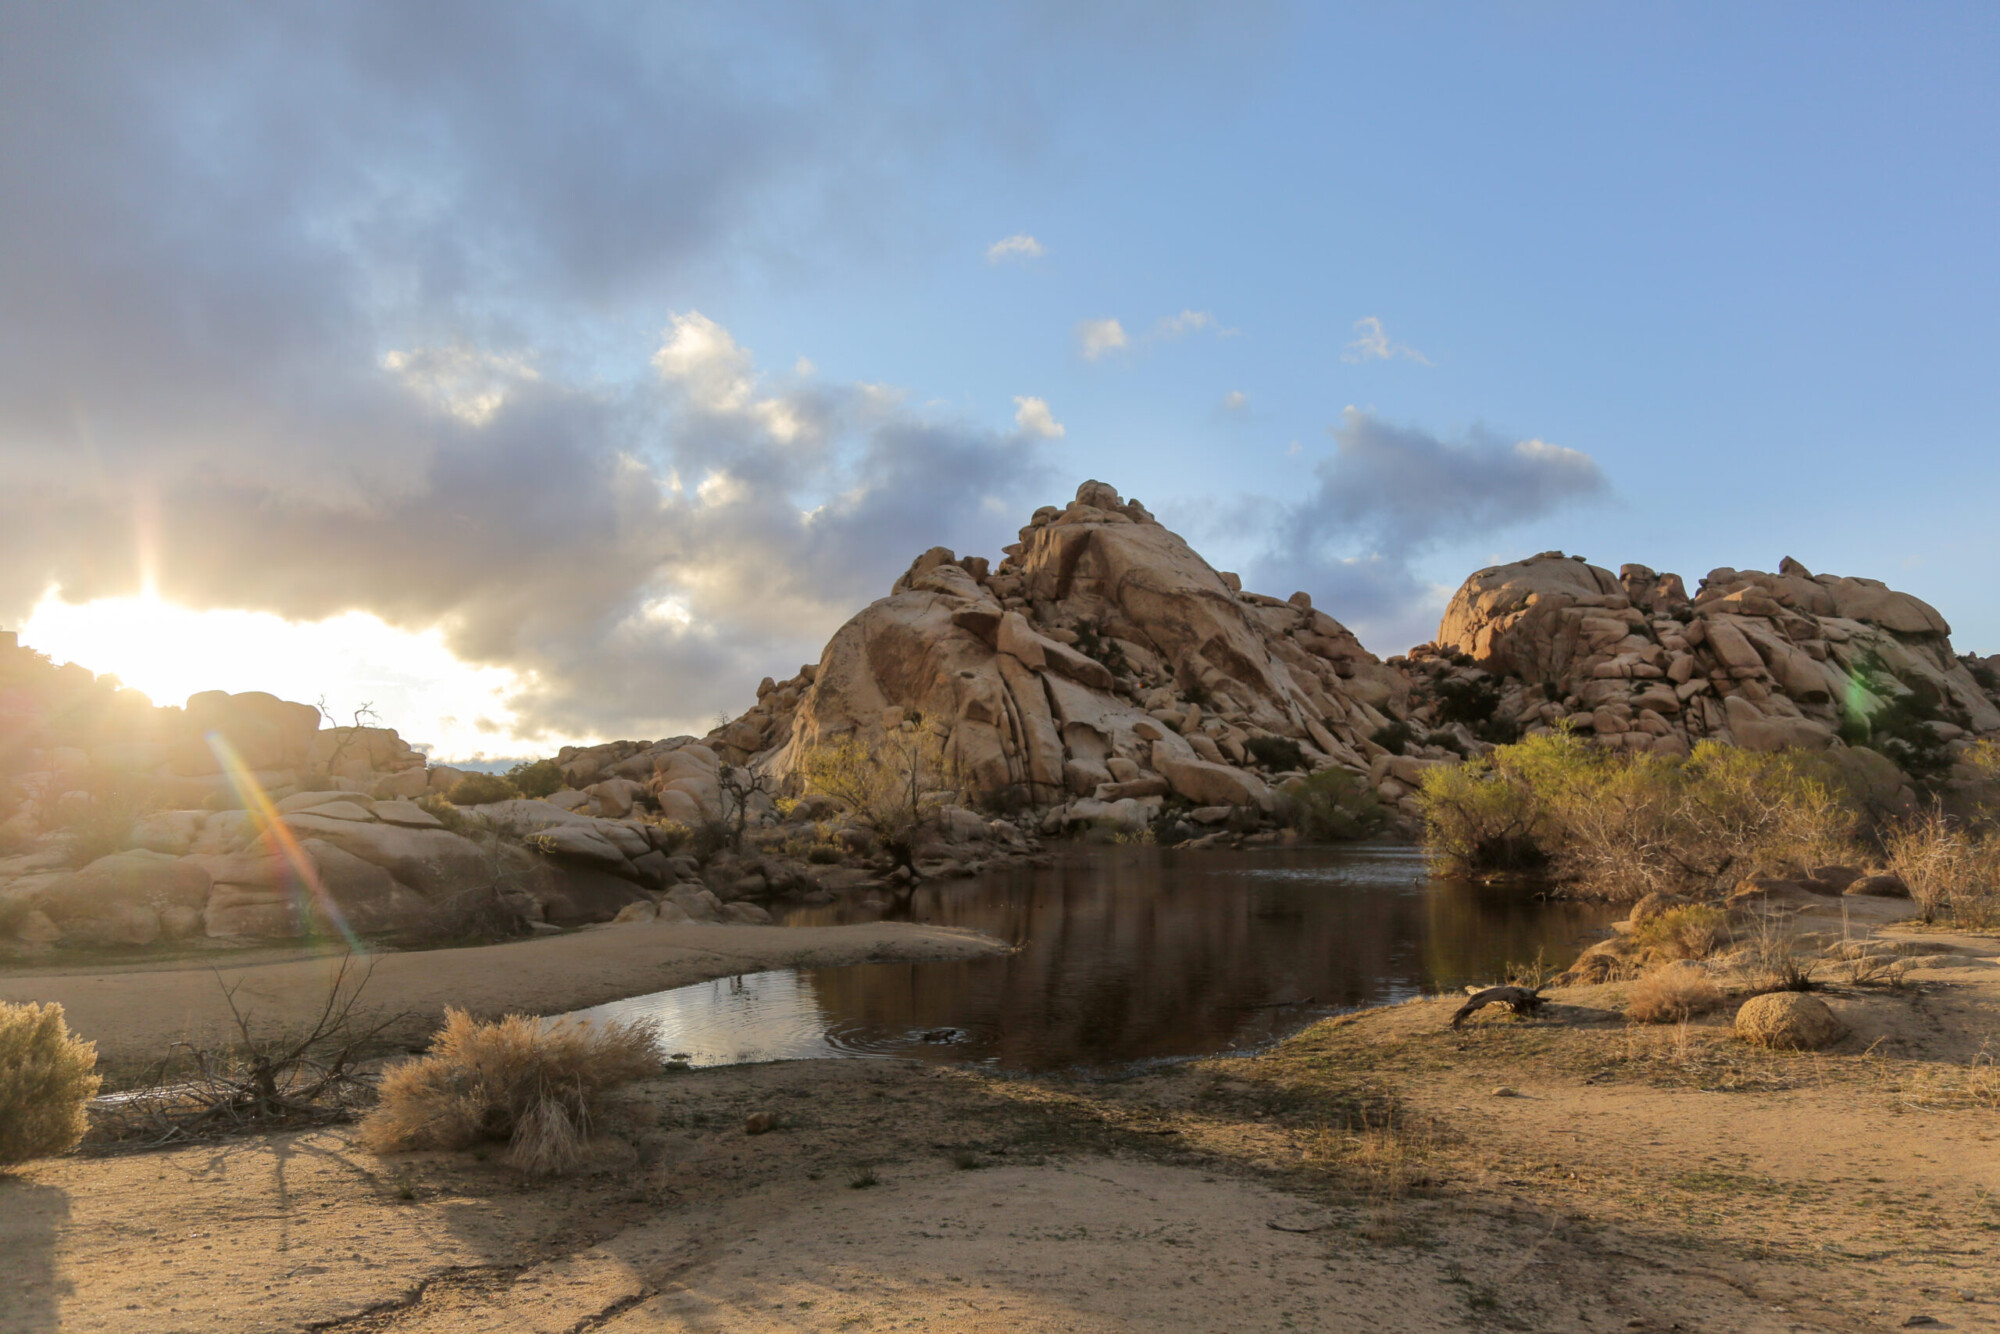 Landscape view of water in Barker Dam with boulder formations in the background on the Barker Dam Trail in Joshua Tree National Park, California.